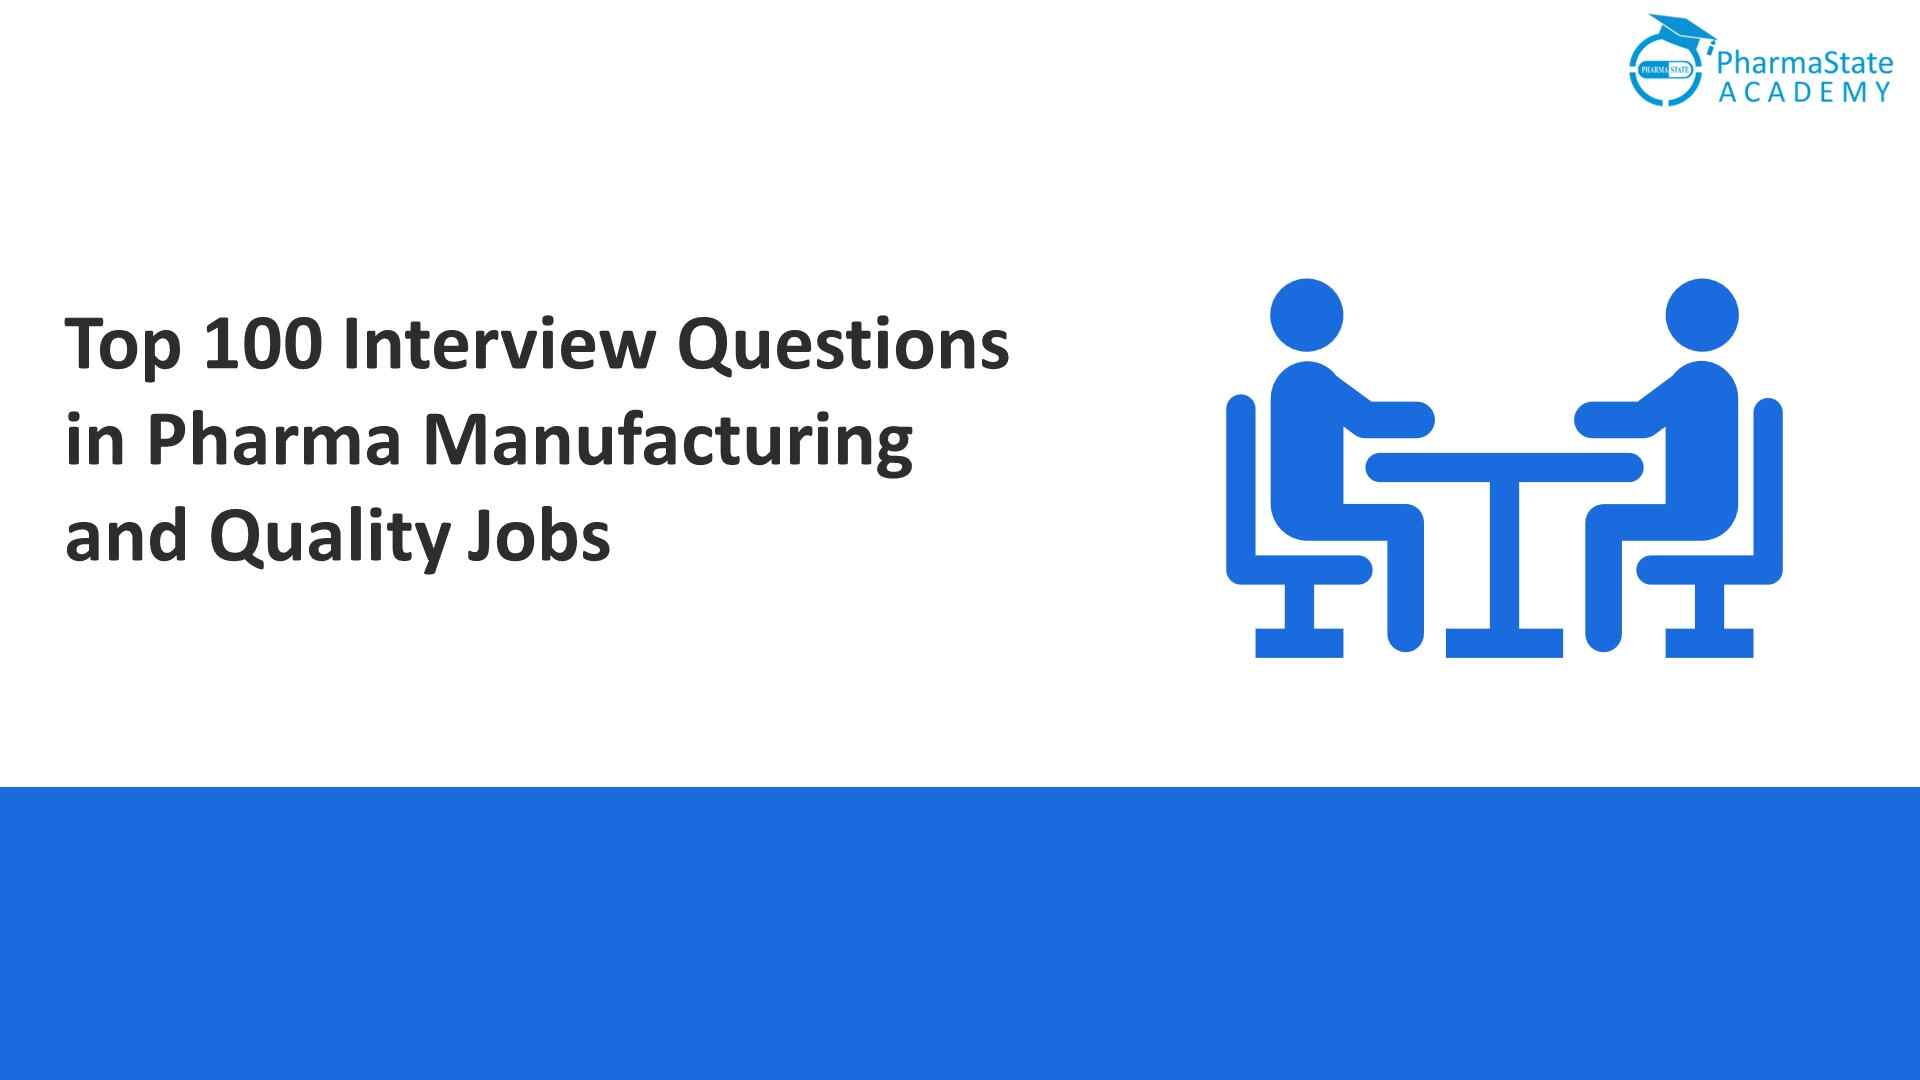 Top 100 Interview Questions for Pharma Manufacturing and Quality Department Jobs